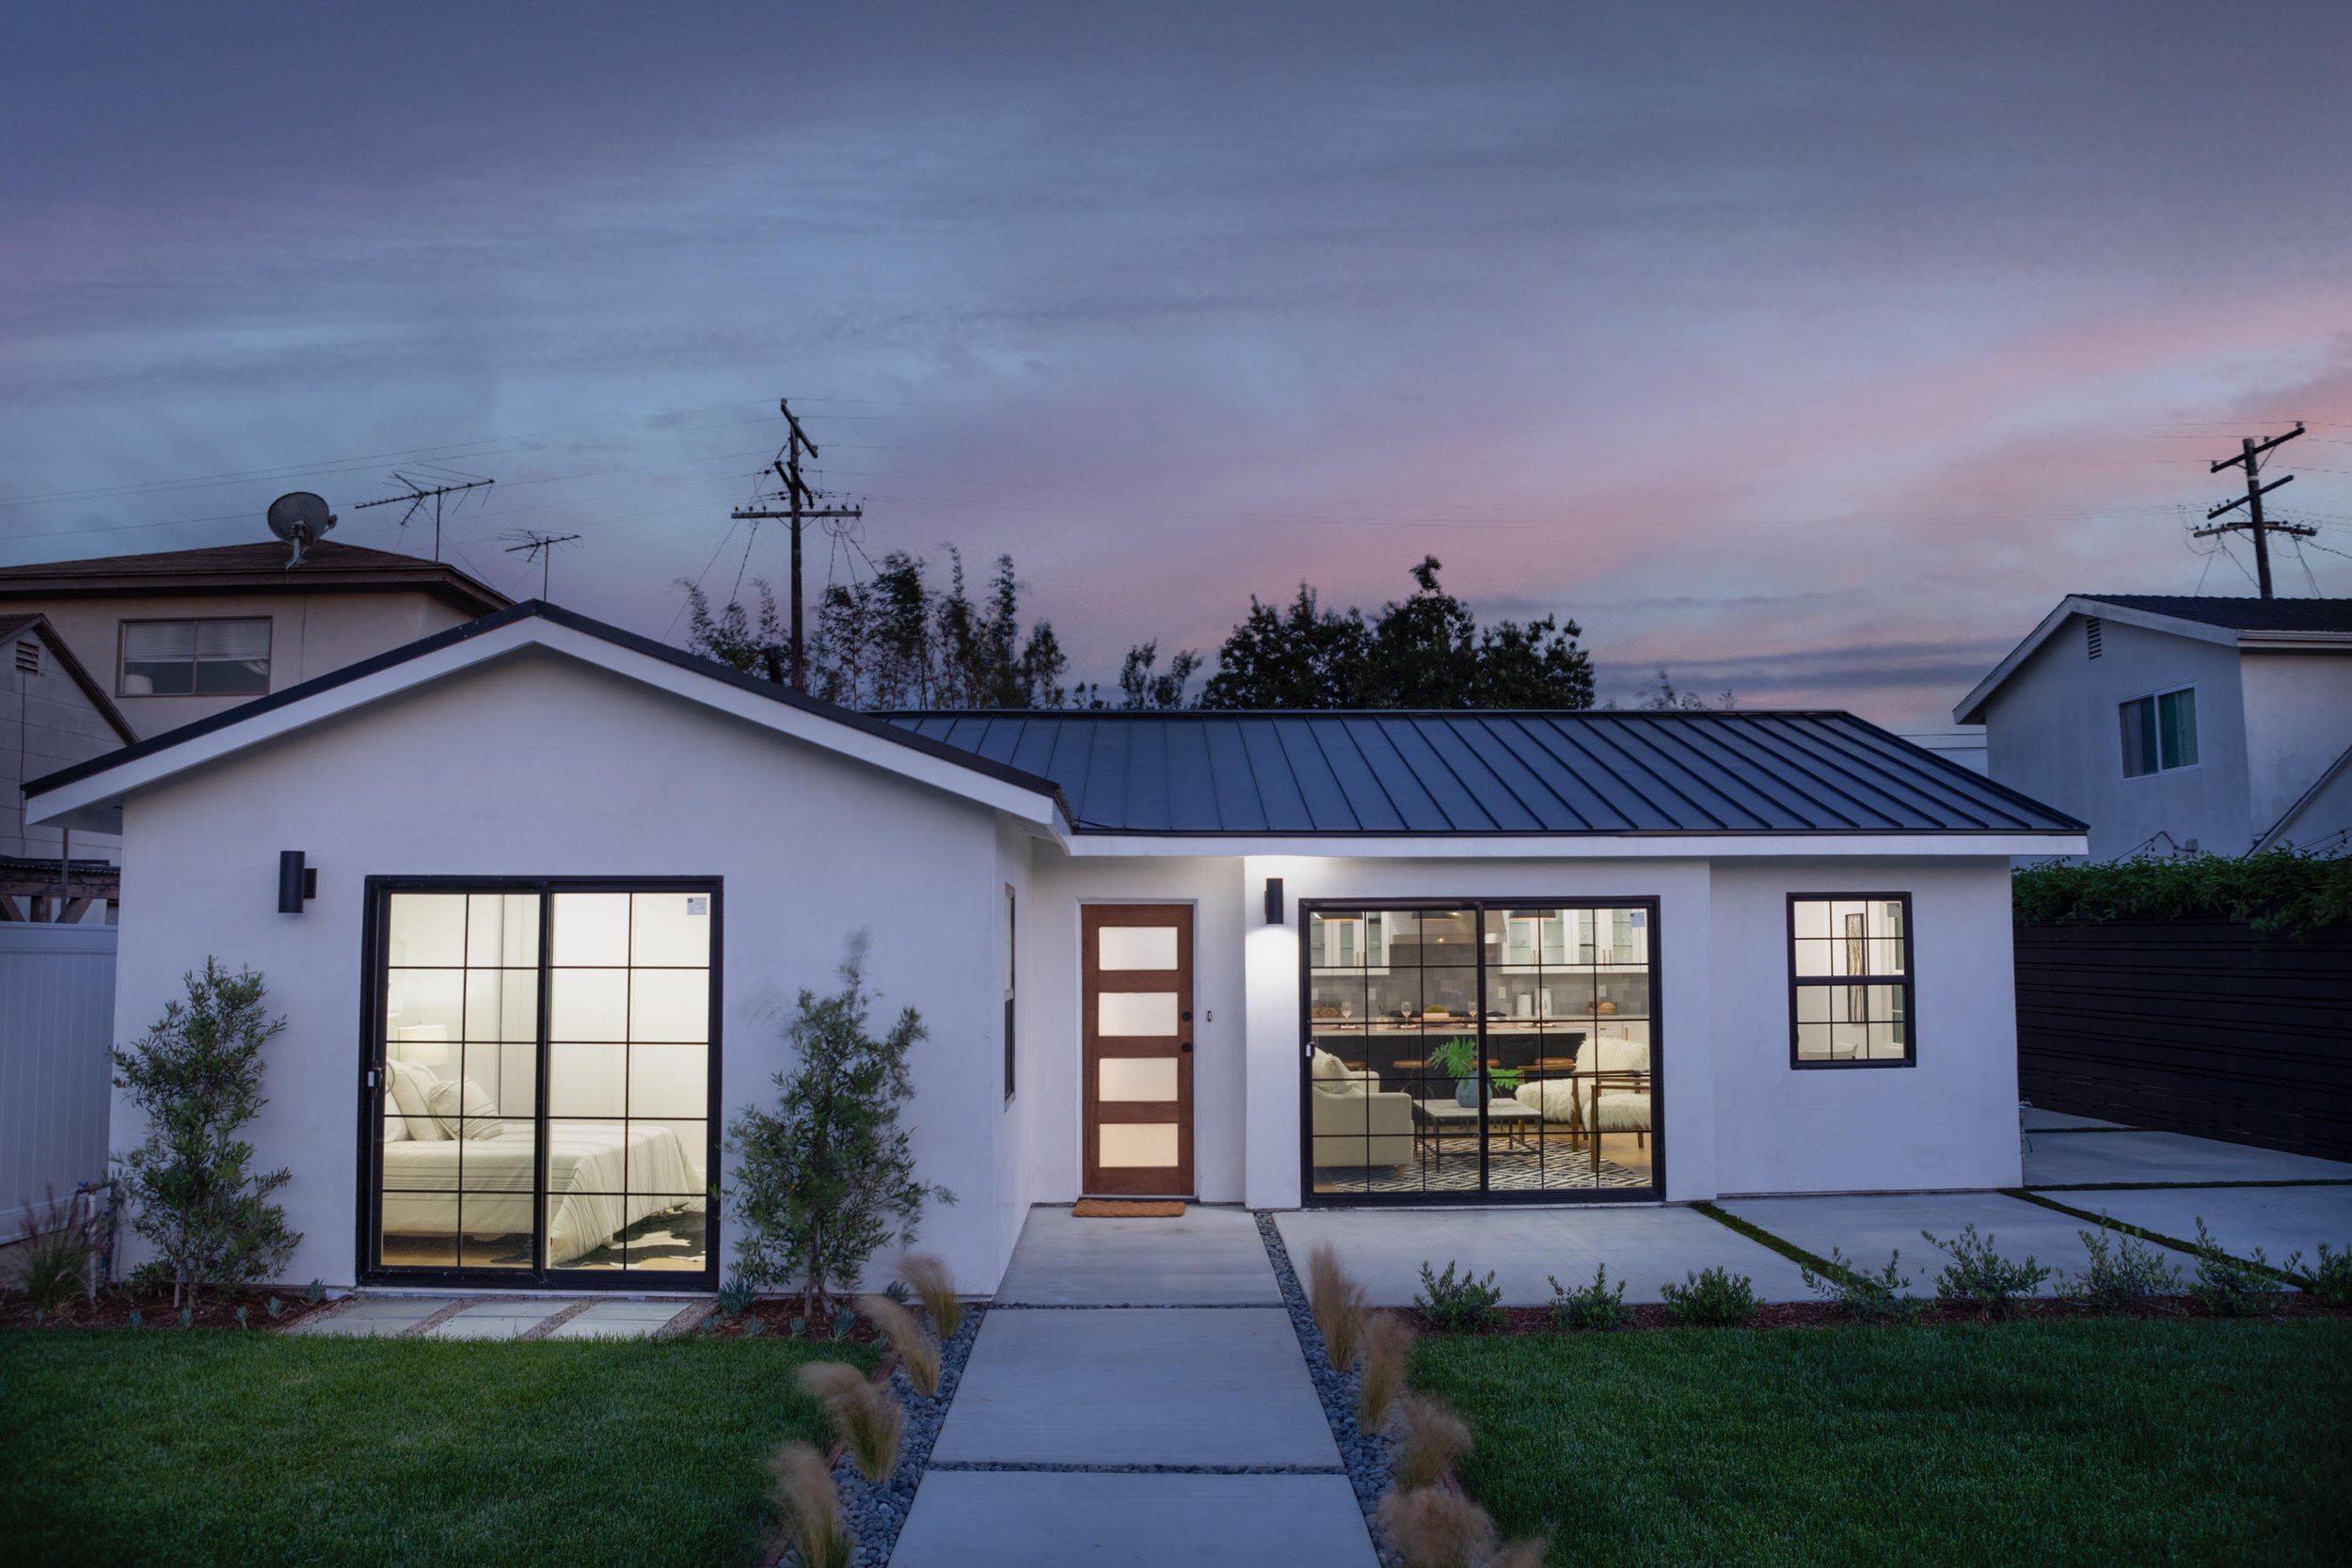   12808 Greene Ave, Los Angeles, CA 90066  SOLD $100K OVER ASKING! $2,100,000 